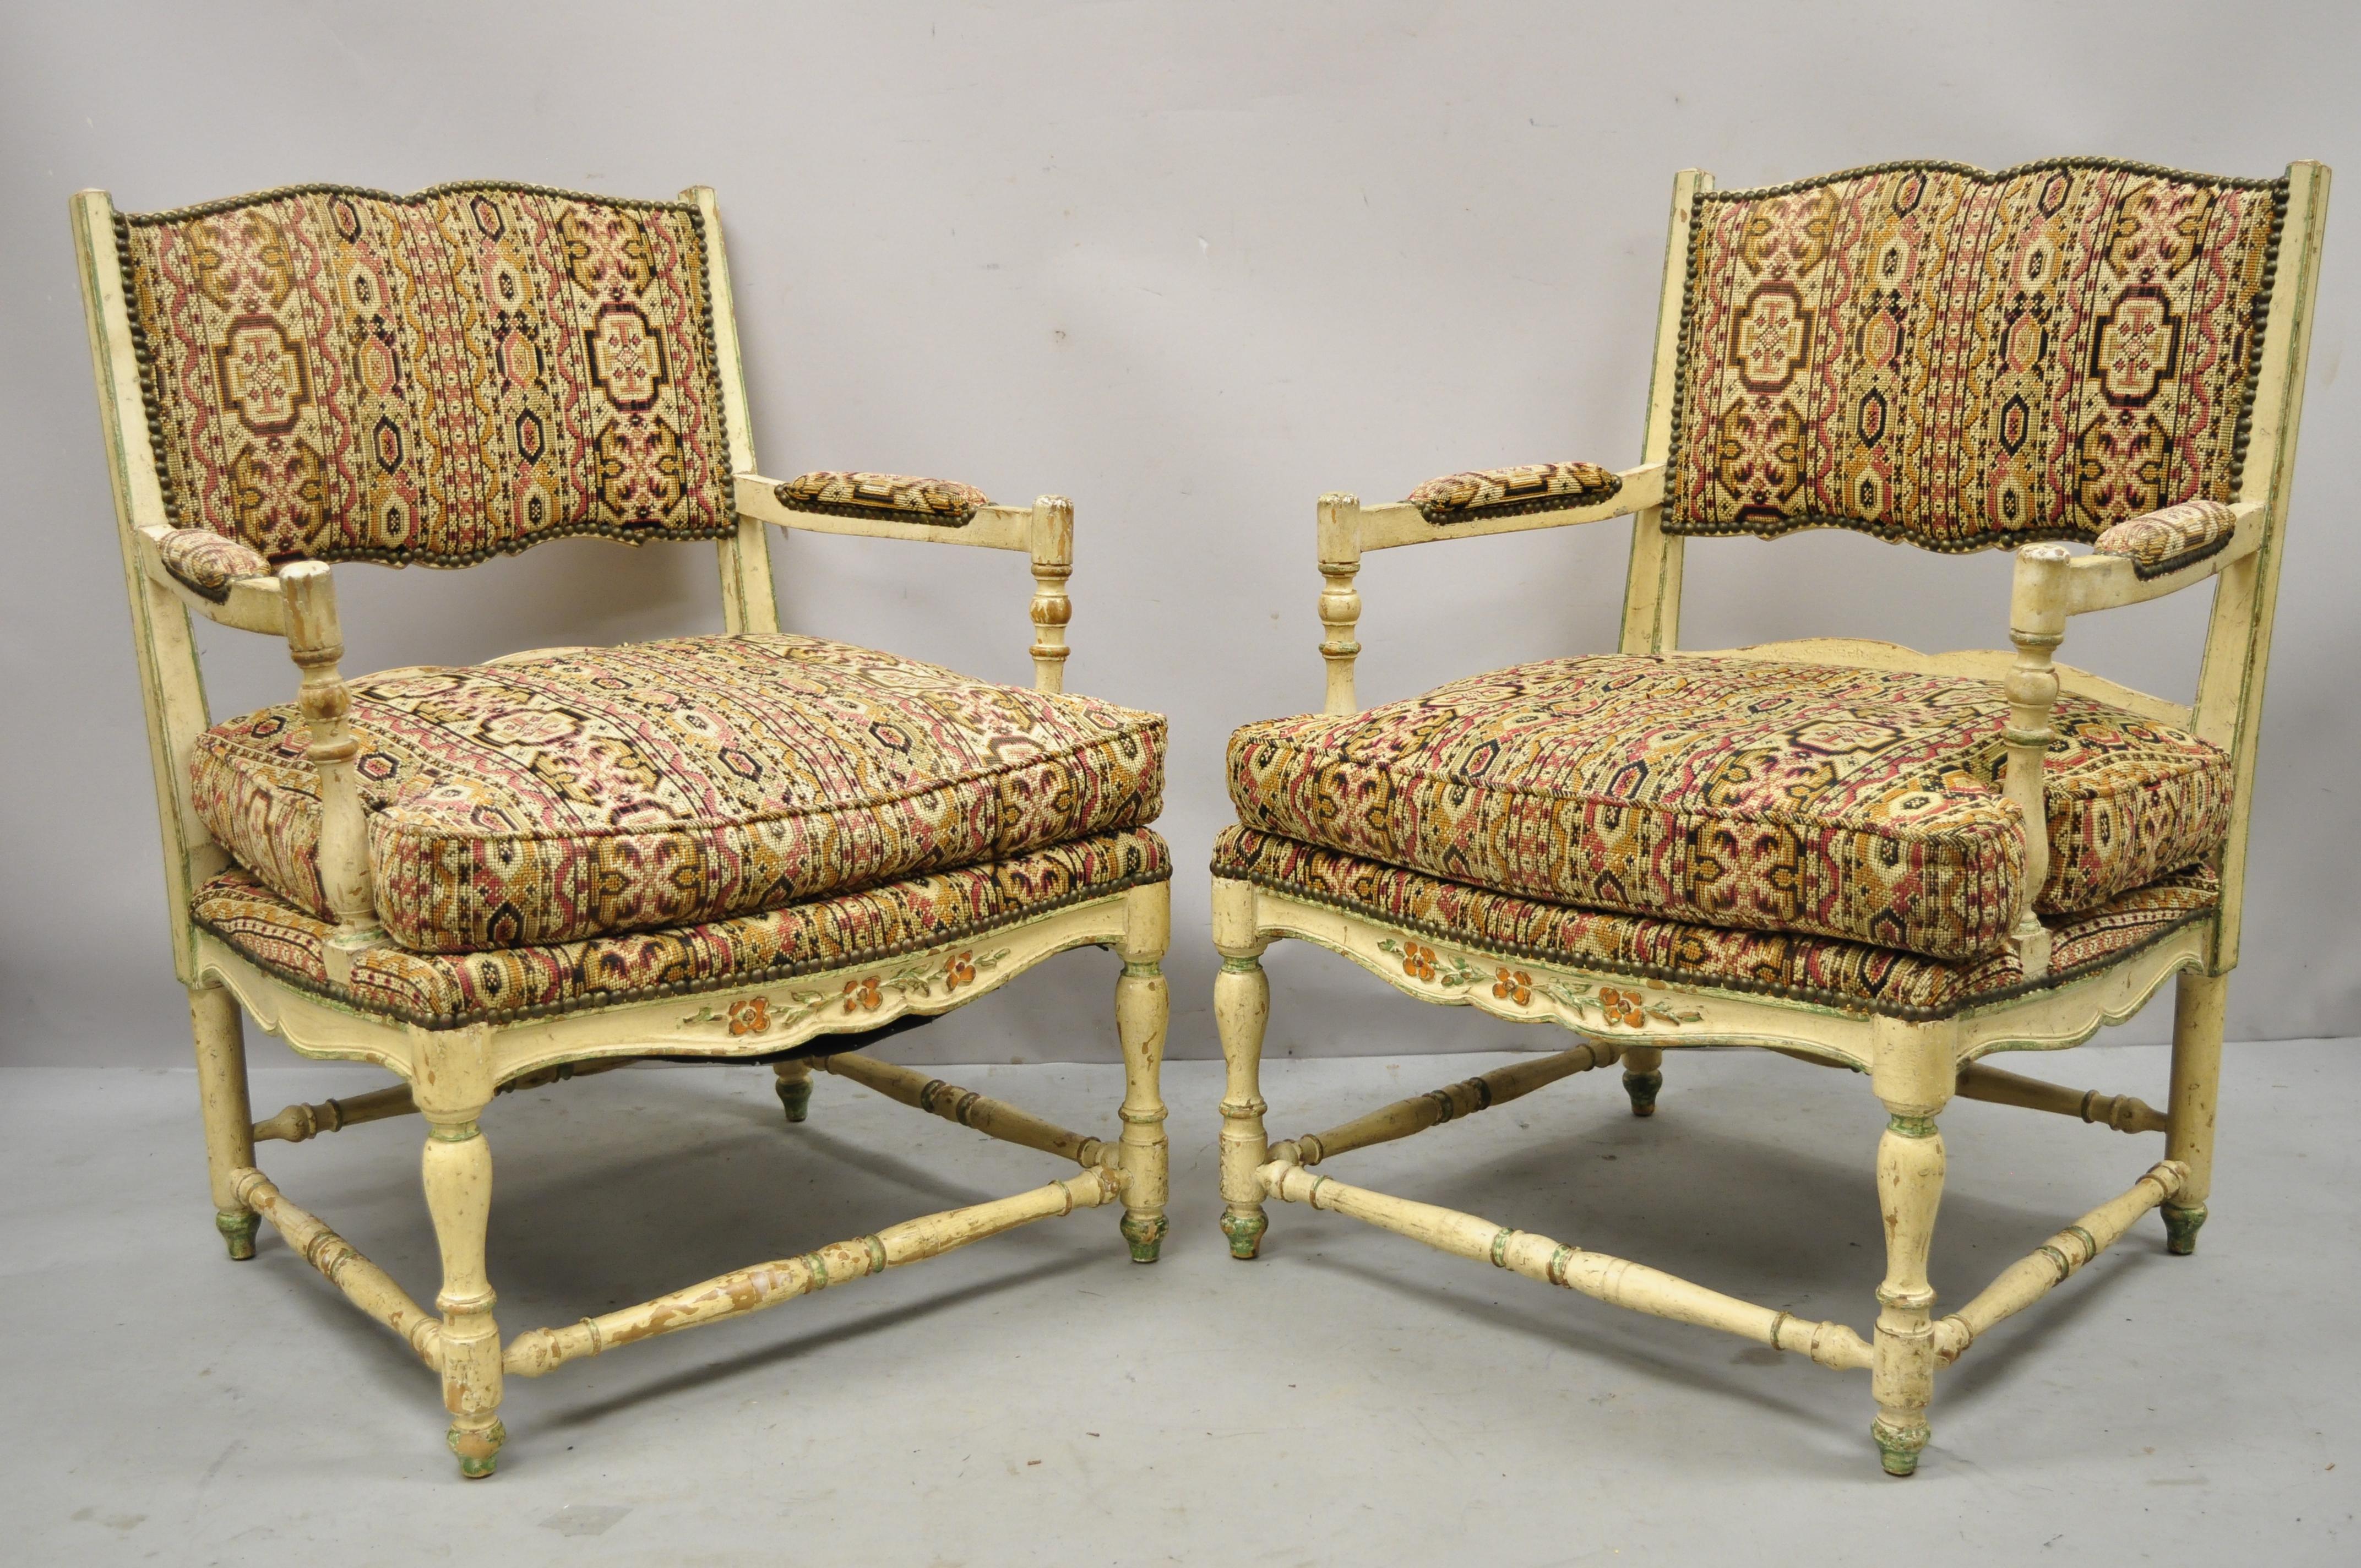 Pair of vintage French provincial cream distress painted lounge arm chairs and ottoman. Item features cream distress painted finish, (2) armchairs and (1) ottoman, ladderback, solid wood frames, nicely carved details, very nice vintage set, great